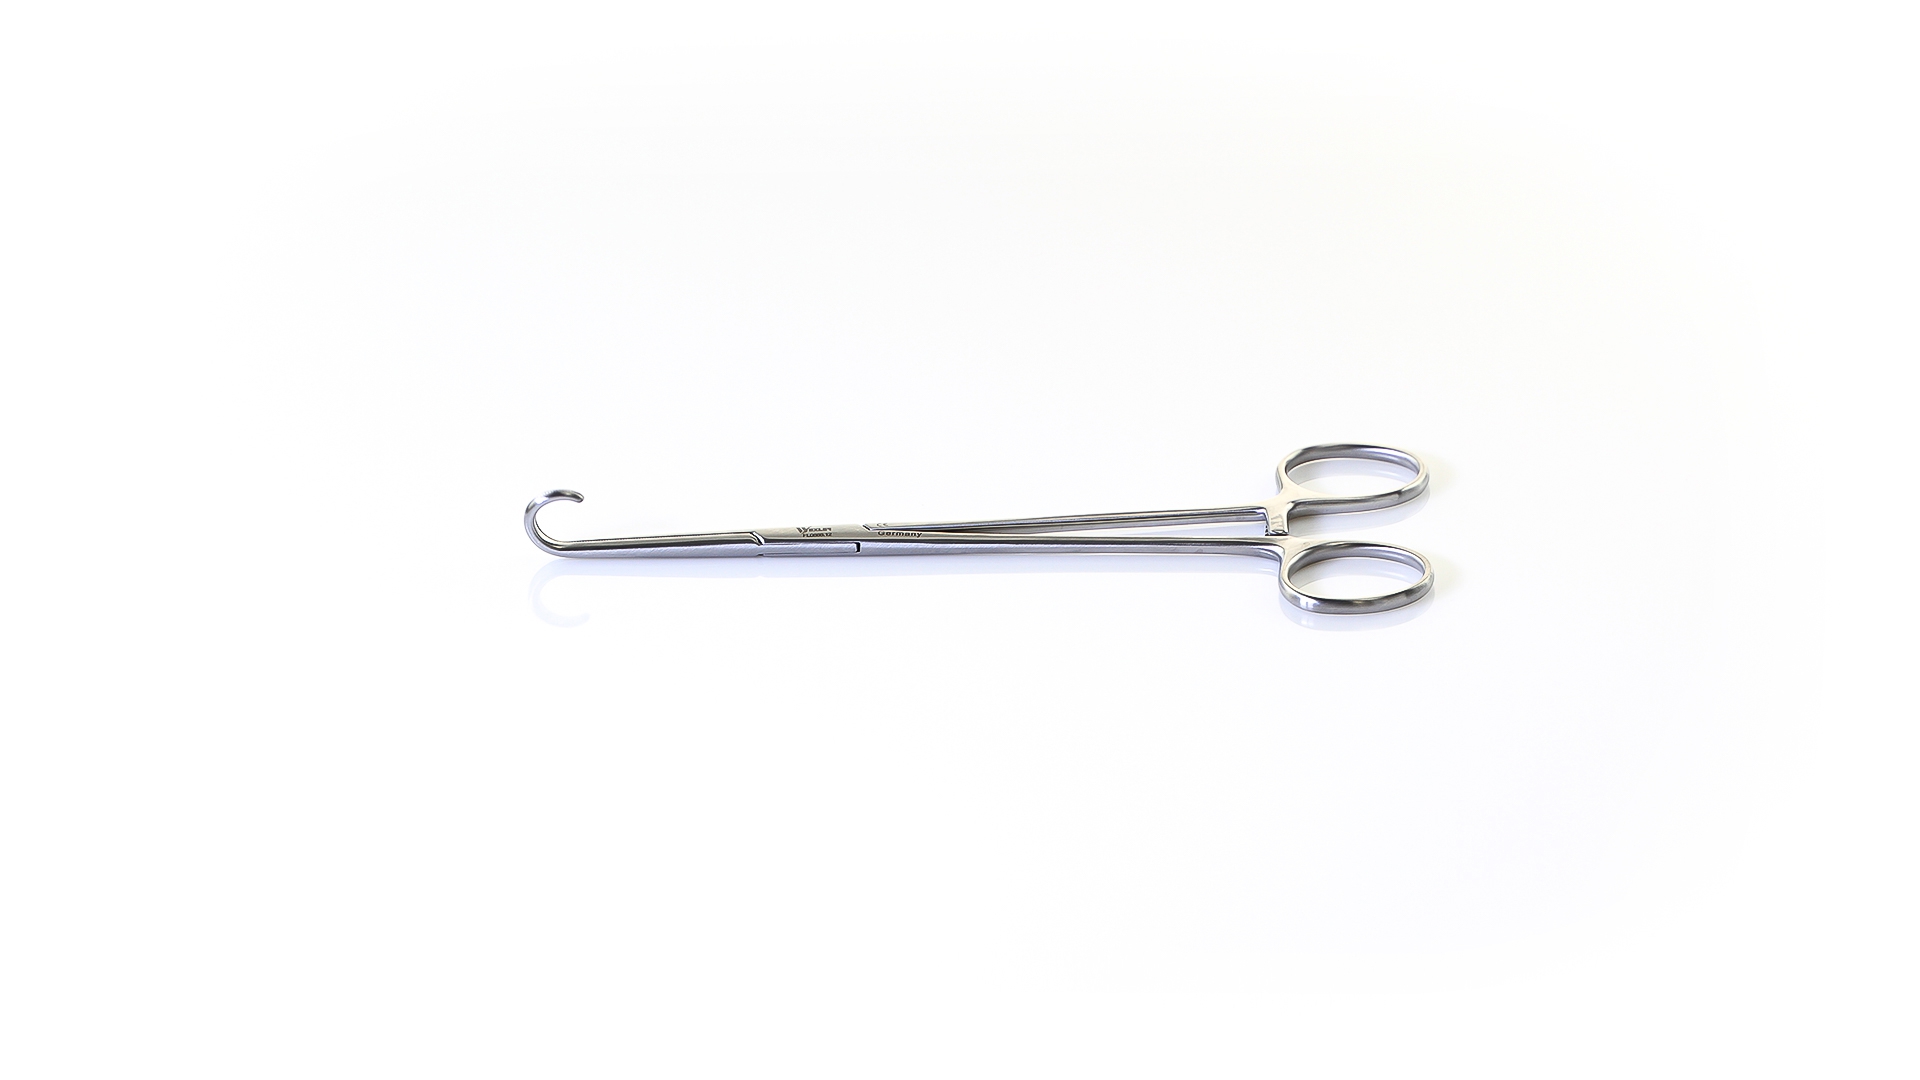 Dua Dissector - Strongly Curved serrated jaws